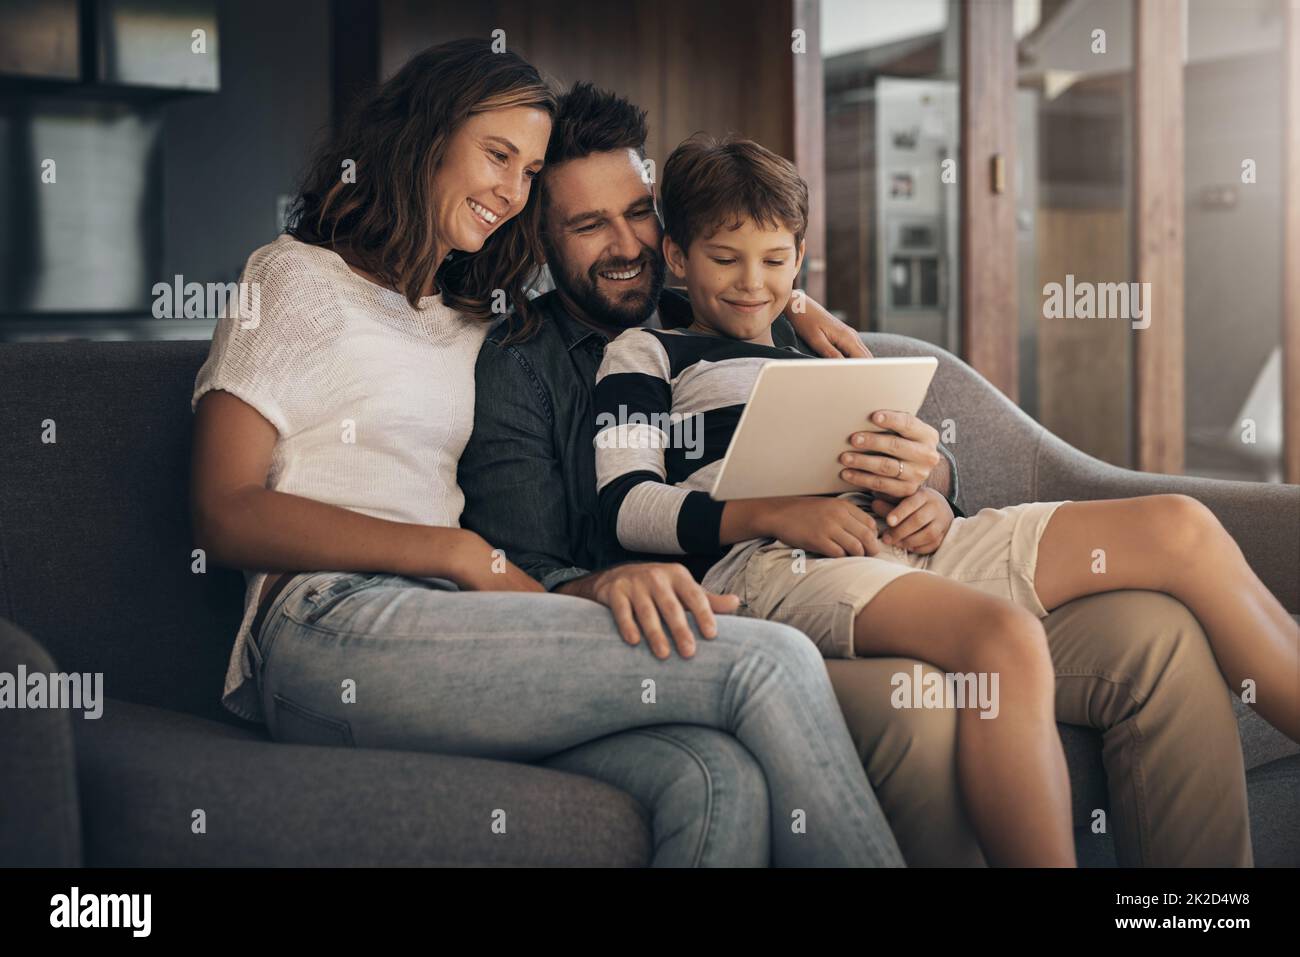 Share the love, share the fun. Shot of an adorable little boy using a digital tablet with his mother and father on the sofa at home. Stock Photo